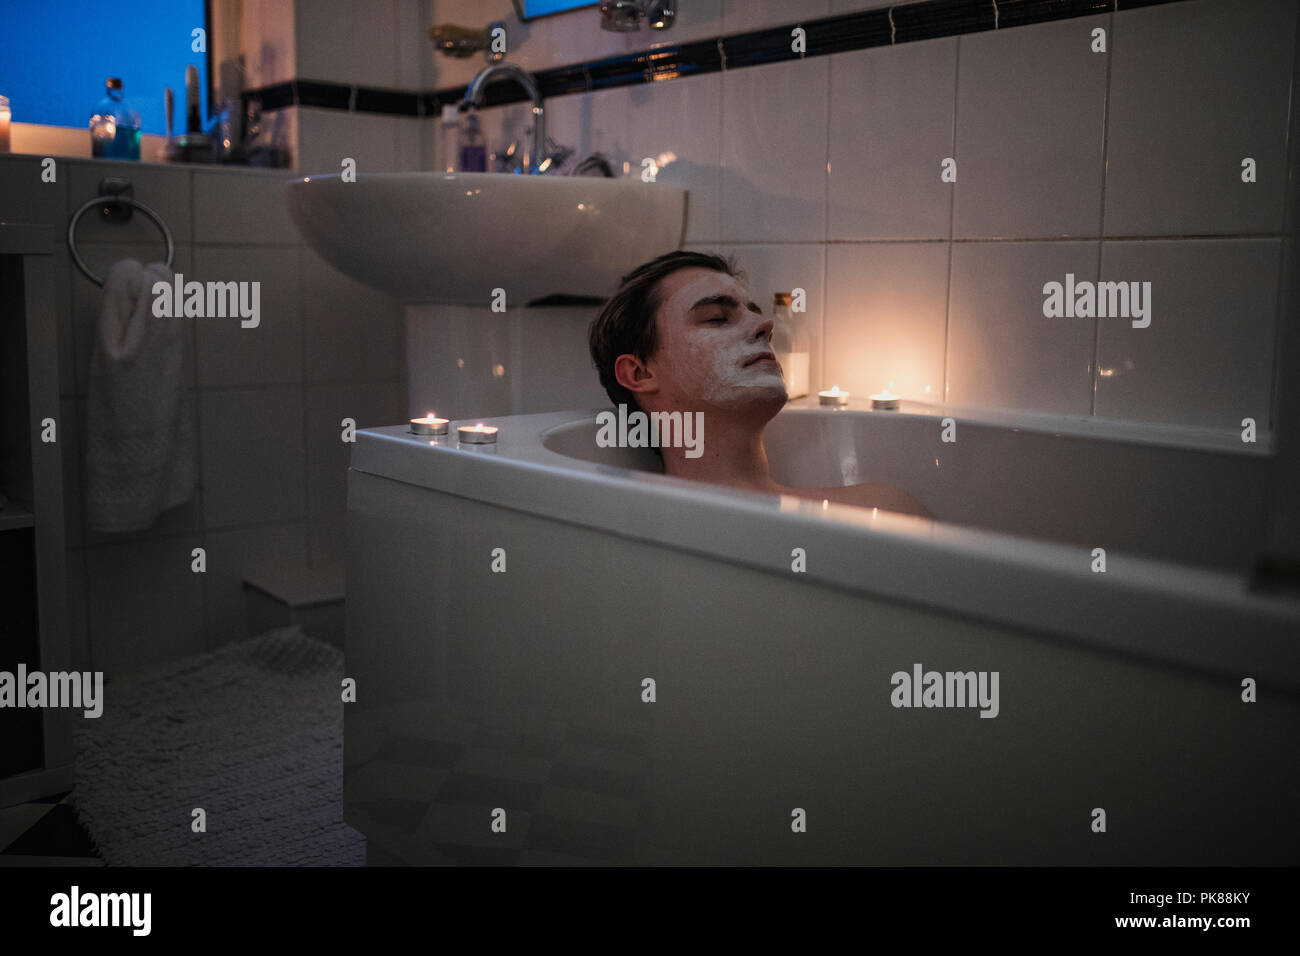 Young man is relaxing in the bath with a face mask on and candles lit around him. Stock Photo